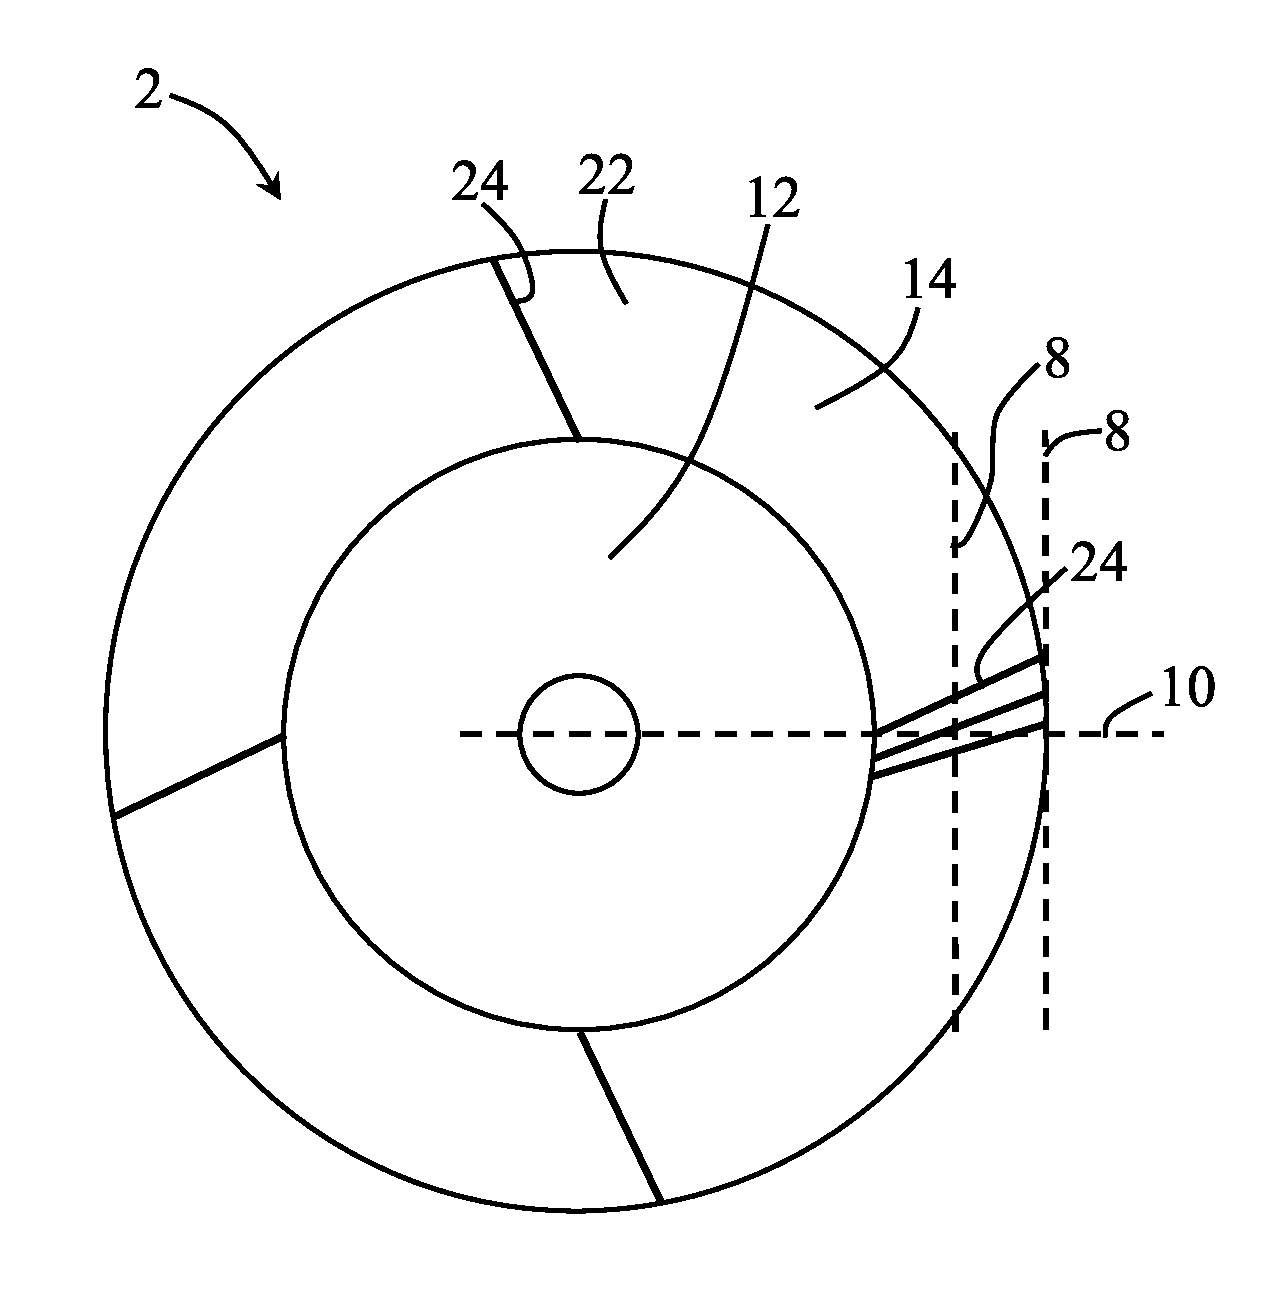 Rotating X-ray anode with an at least partly radially aligned ground structure